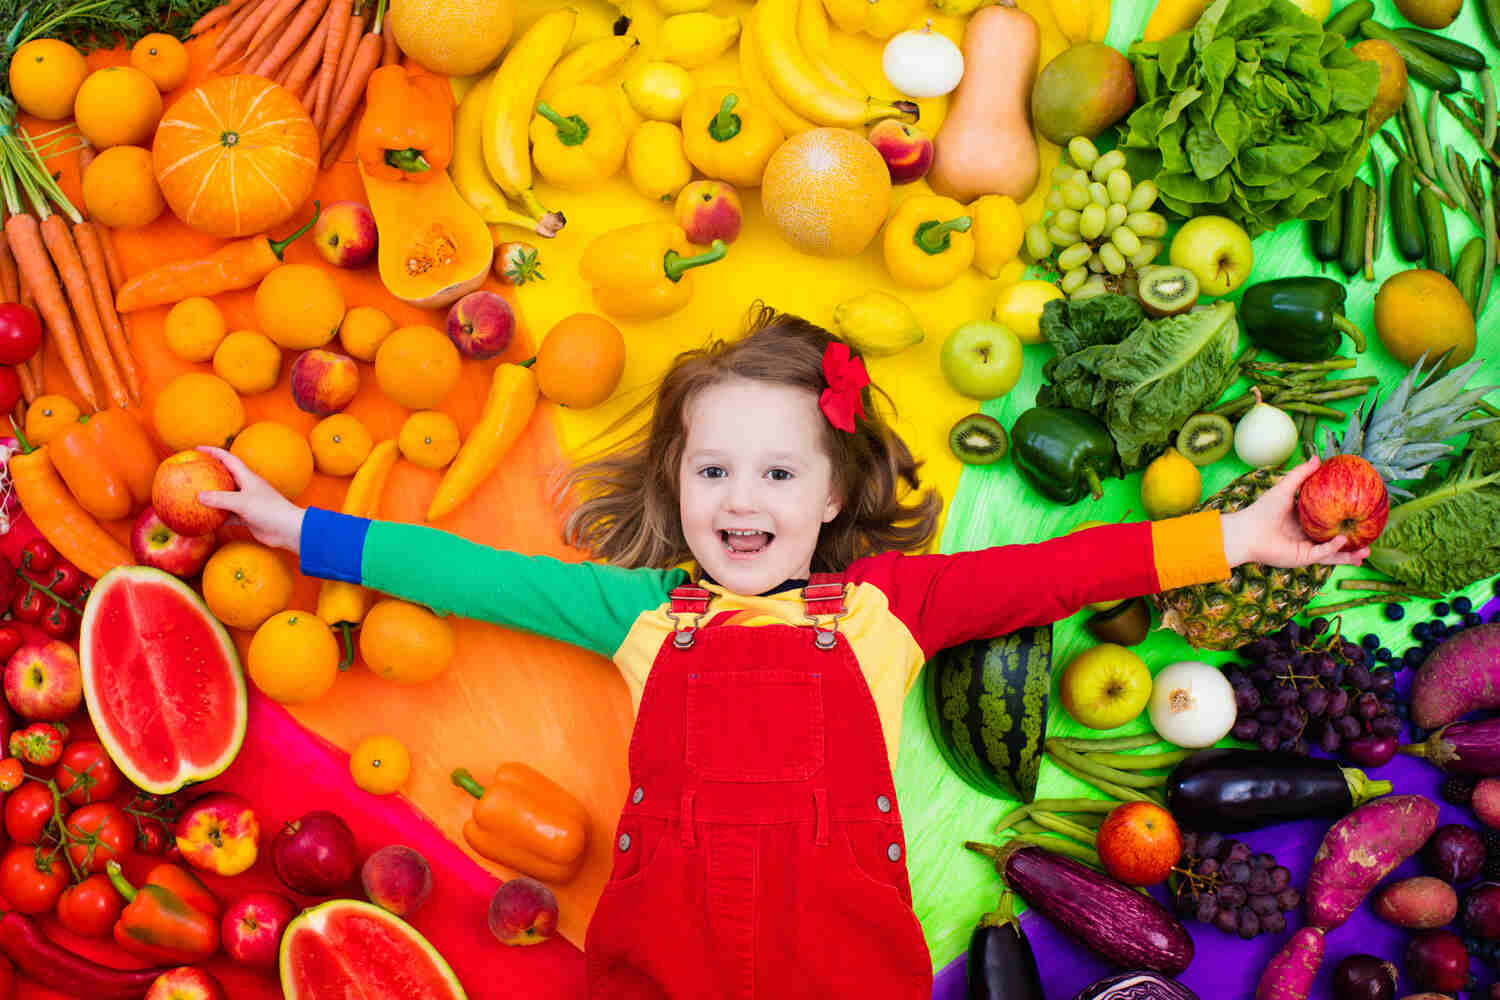 Feeding Guide For Vegetarian Toddlers – Everything You Need to Know